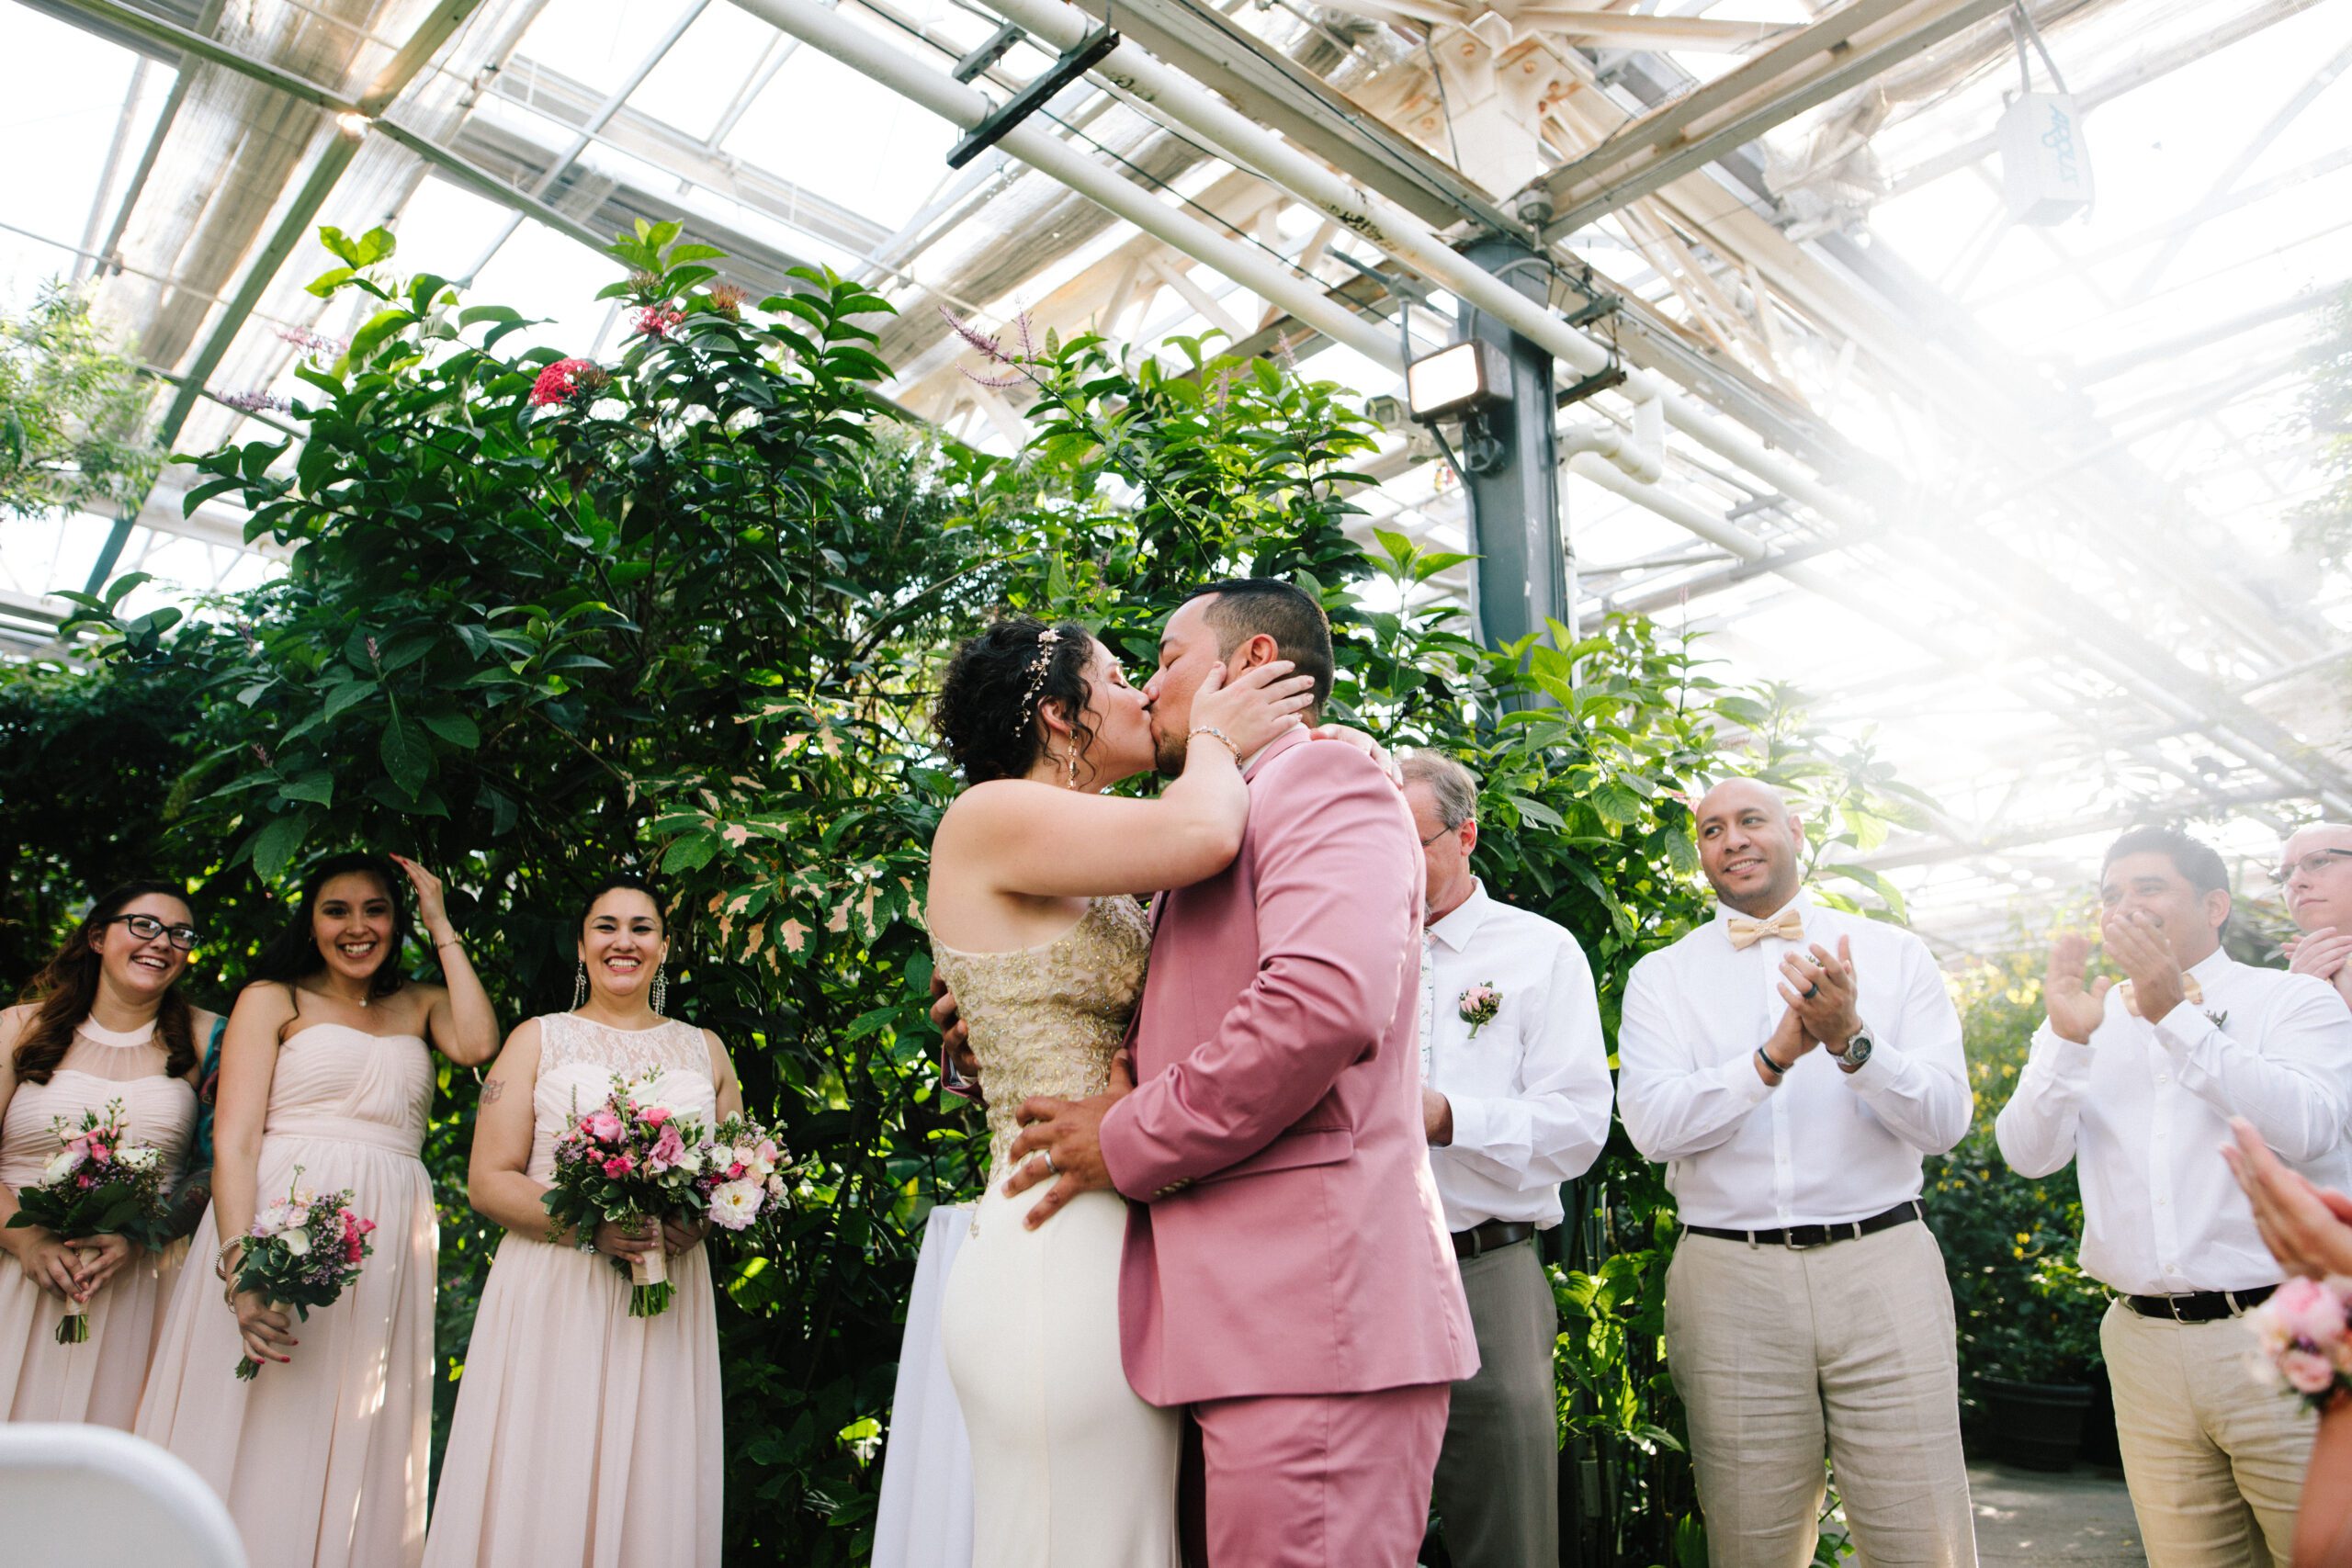 The bride and groom kiss for the first time during their Butterfly Pavilion Wedding. ⁠